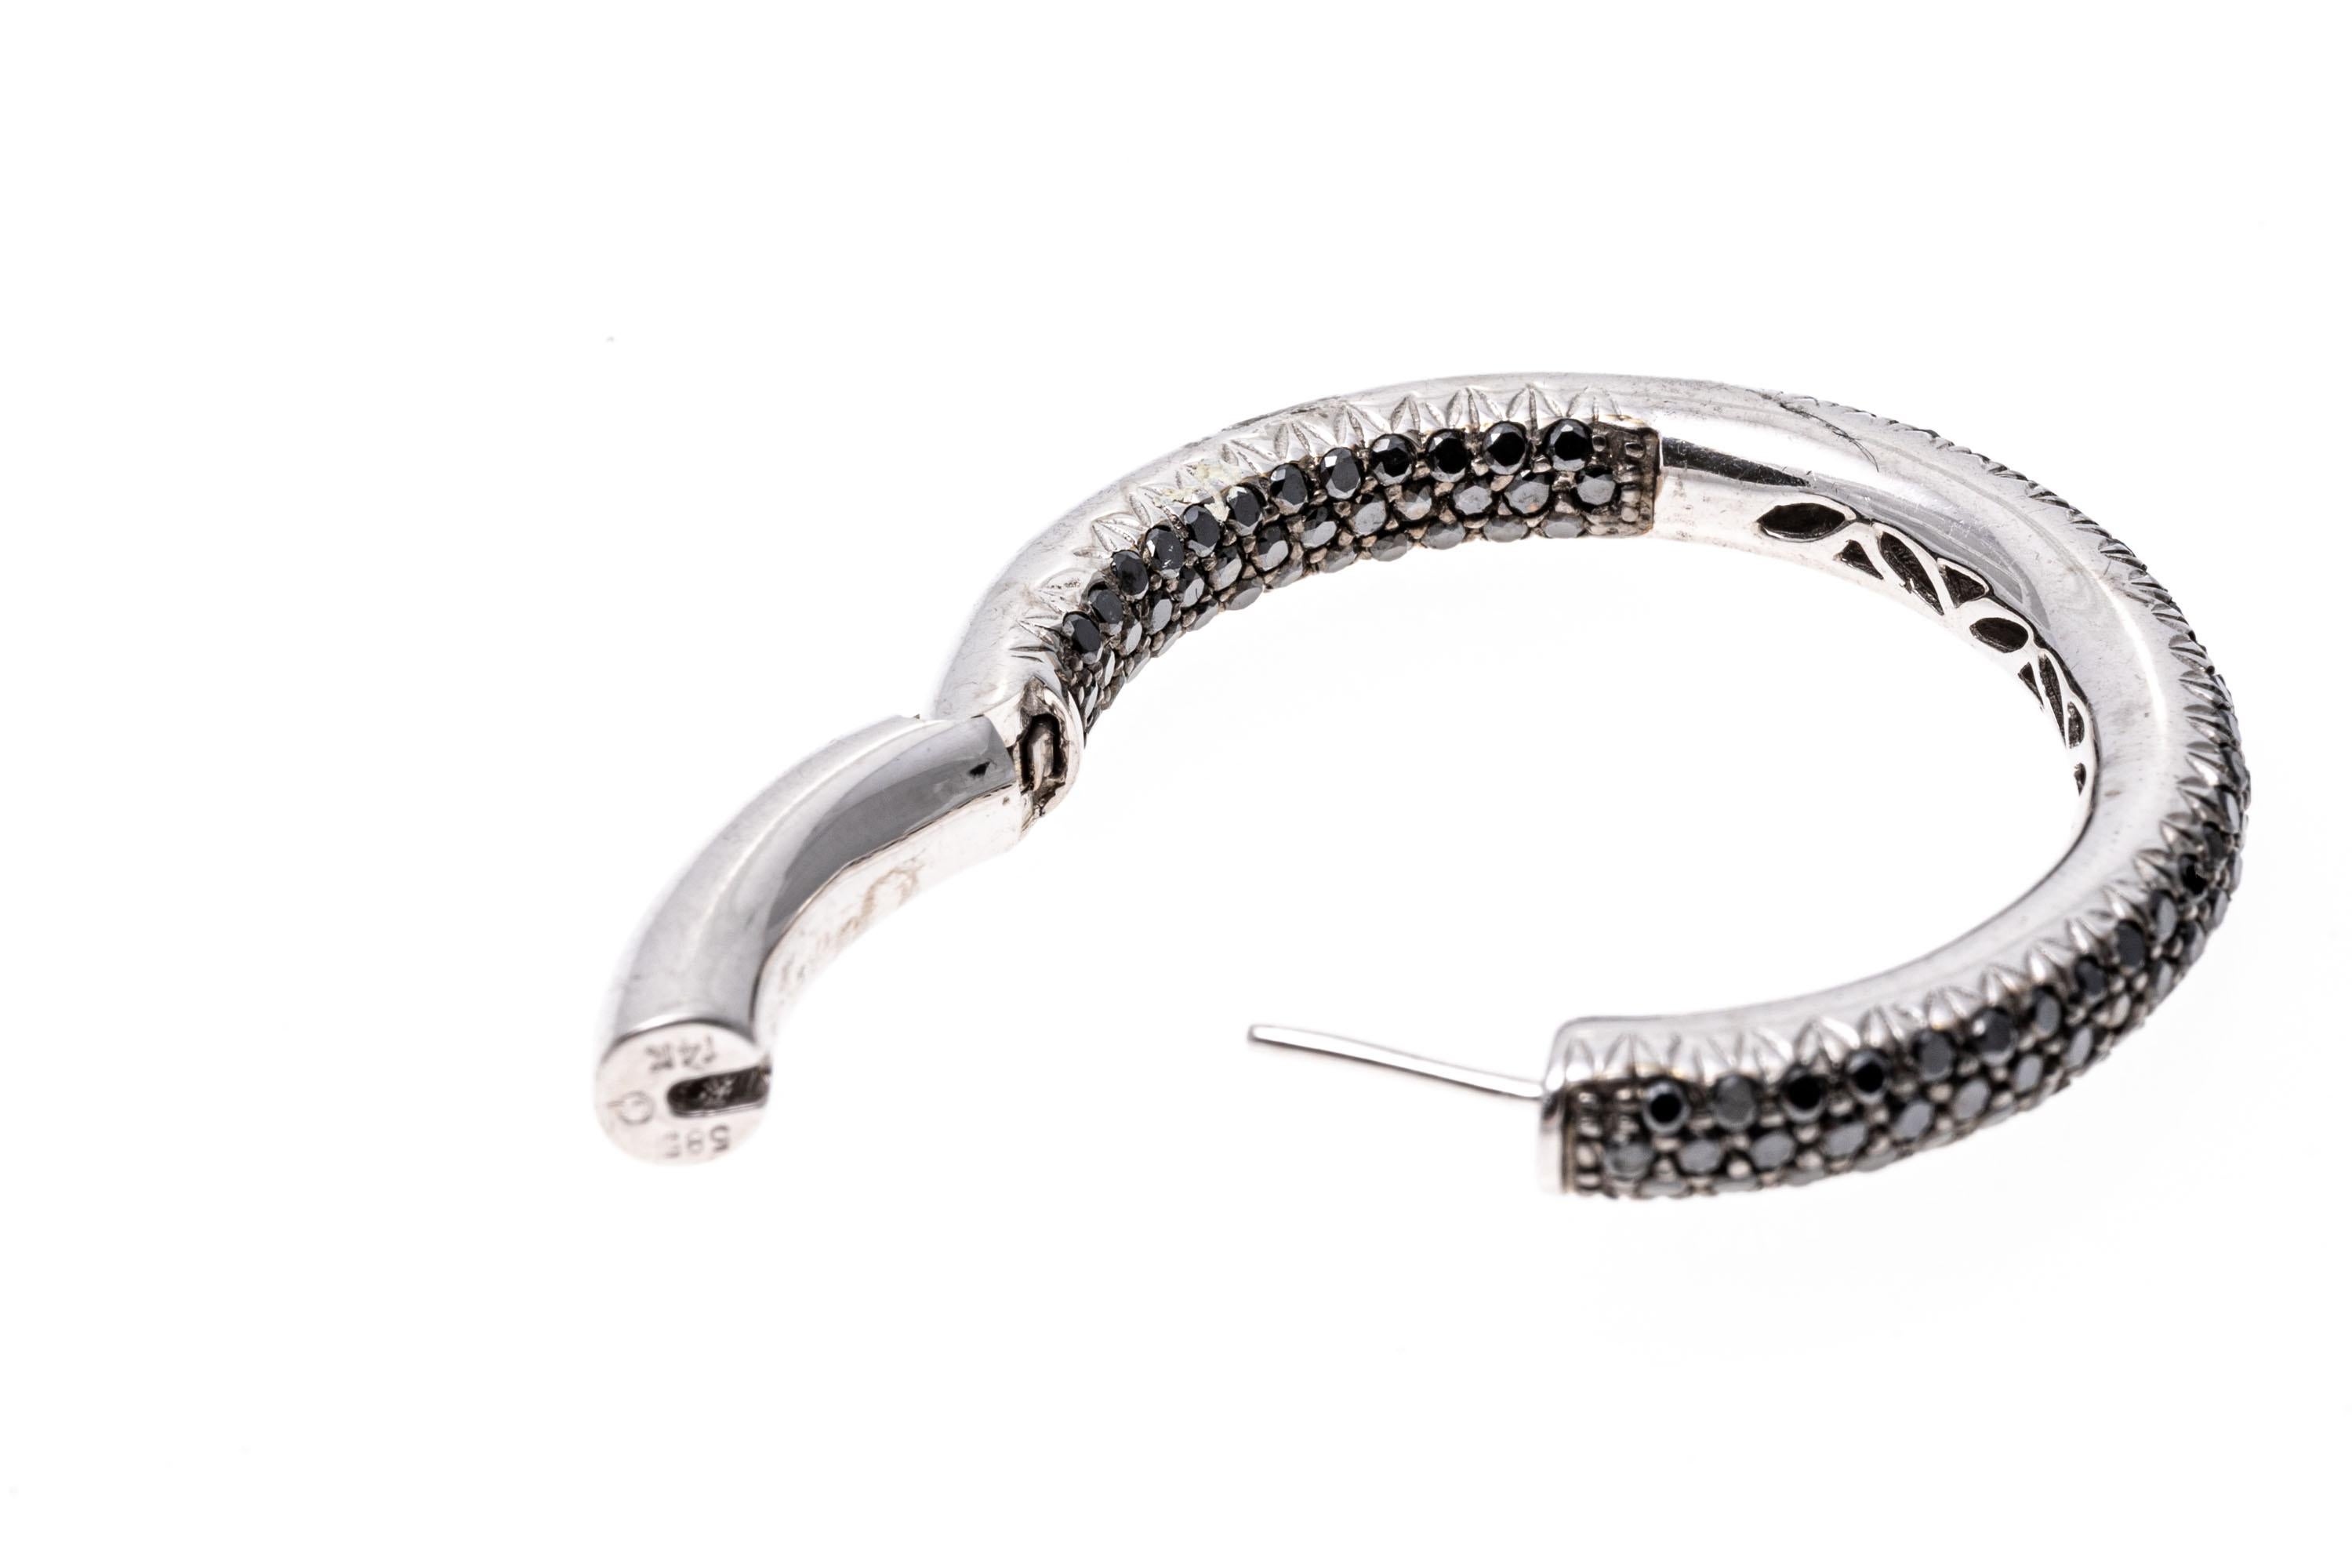 14k White Gold Stunning Pave Set Black Diamond Round Hoop Earrings, 2.85 TCW For Sale 2